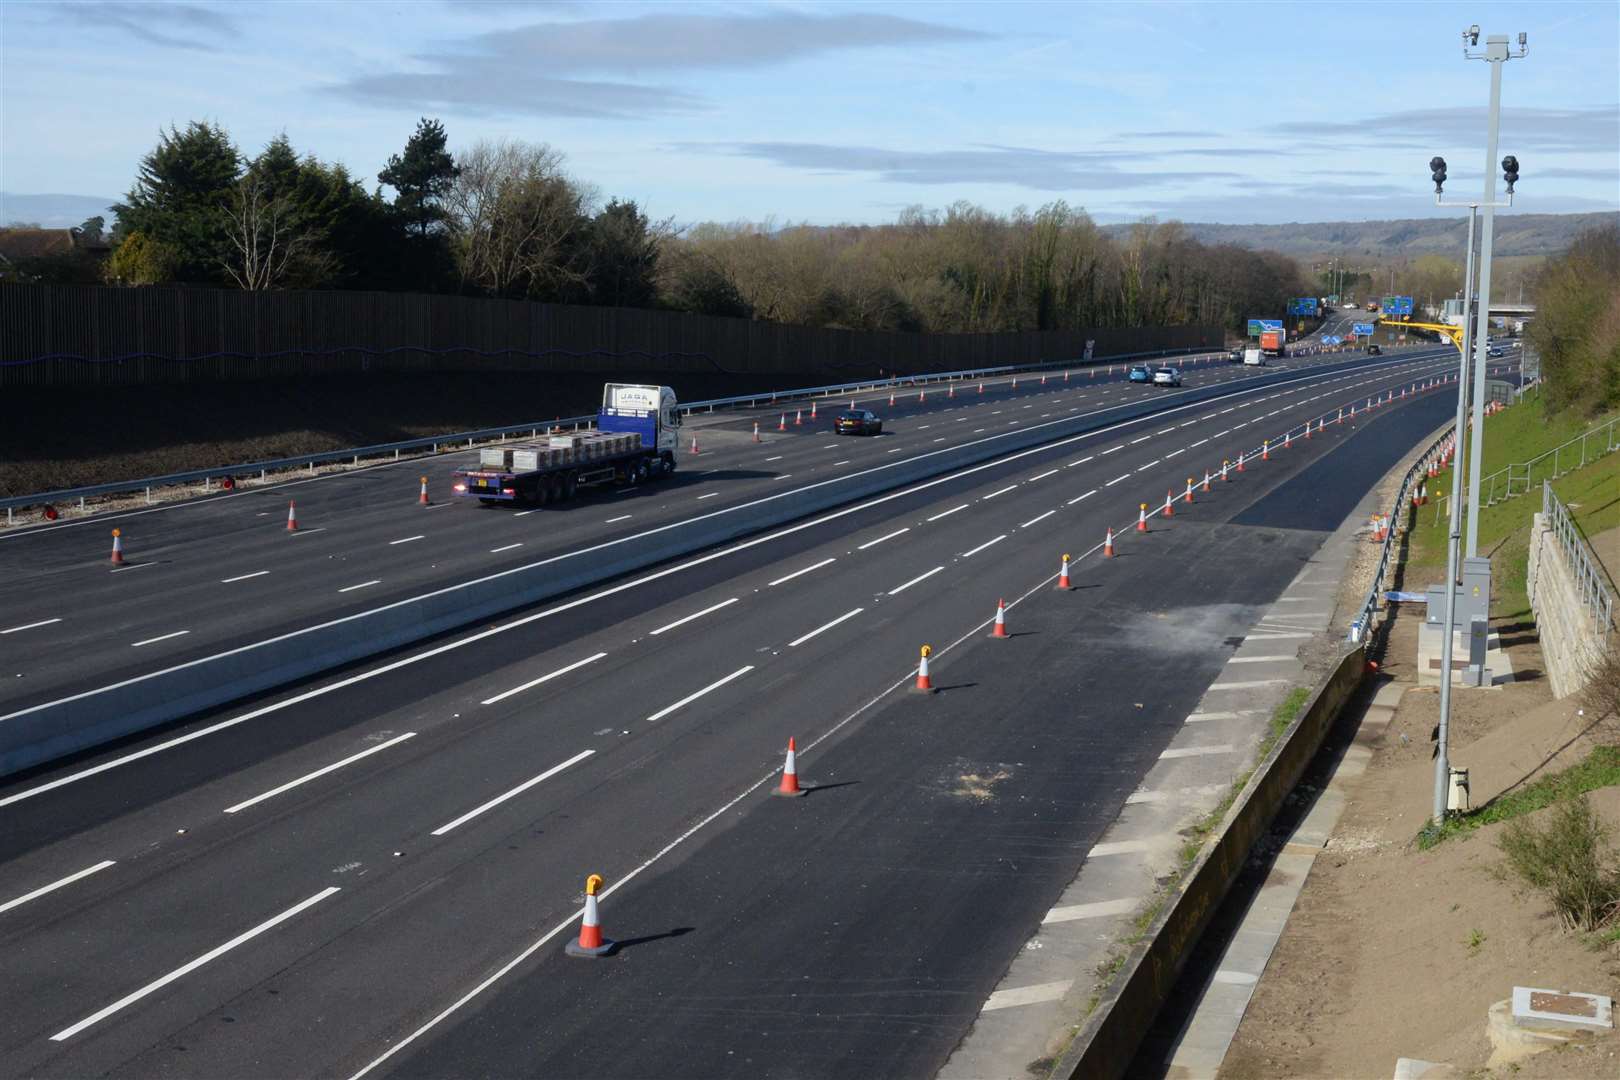 Roads became quieter as we headed towards lockdown - here's the M20 on a Tuesday morning.